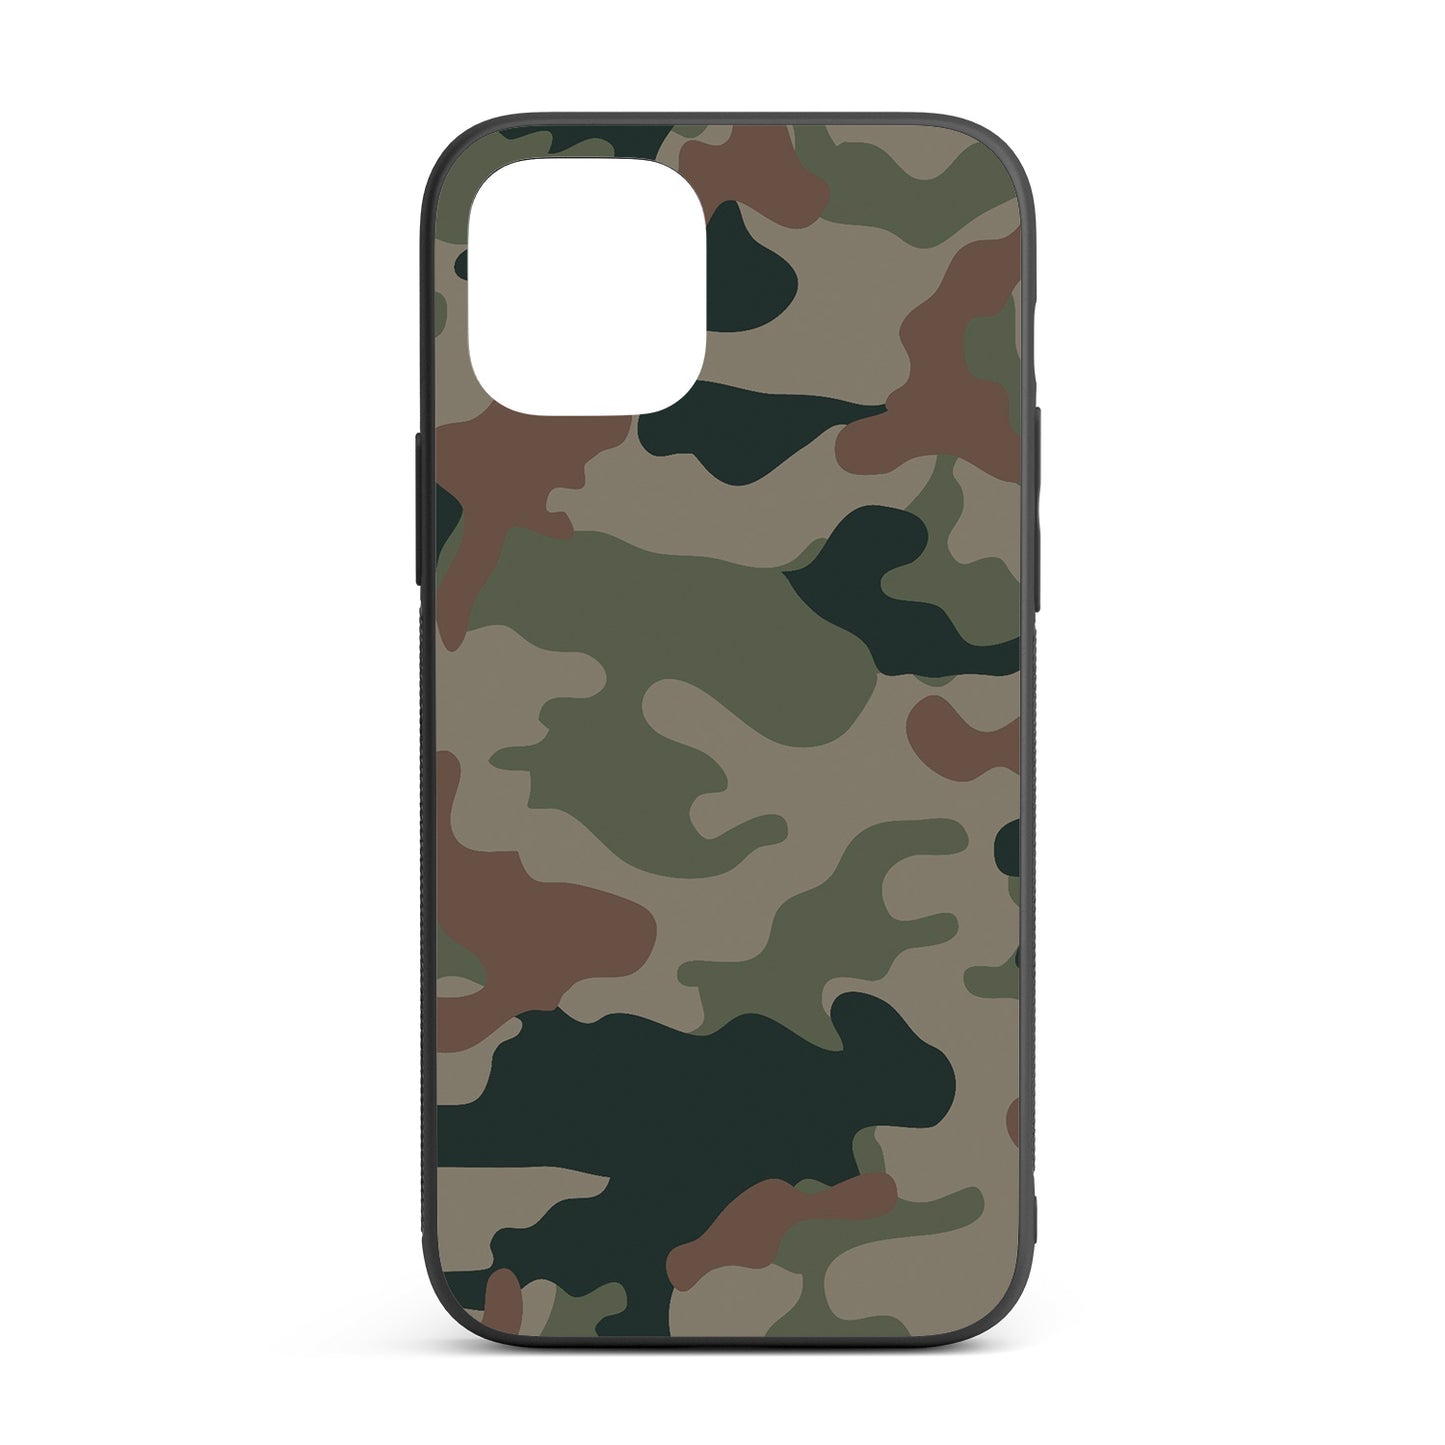 Camouflage iPhone glass case